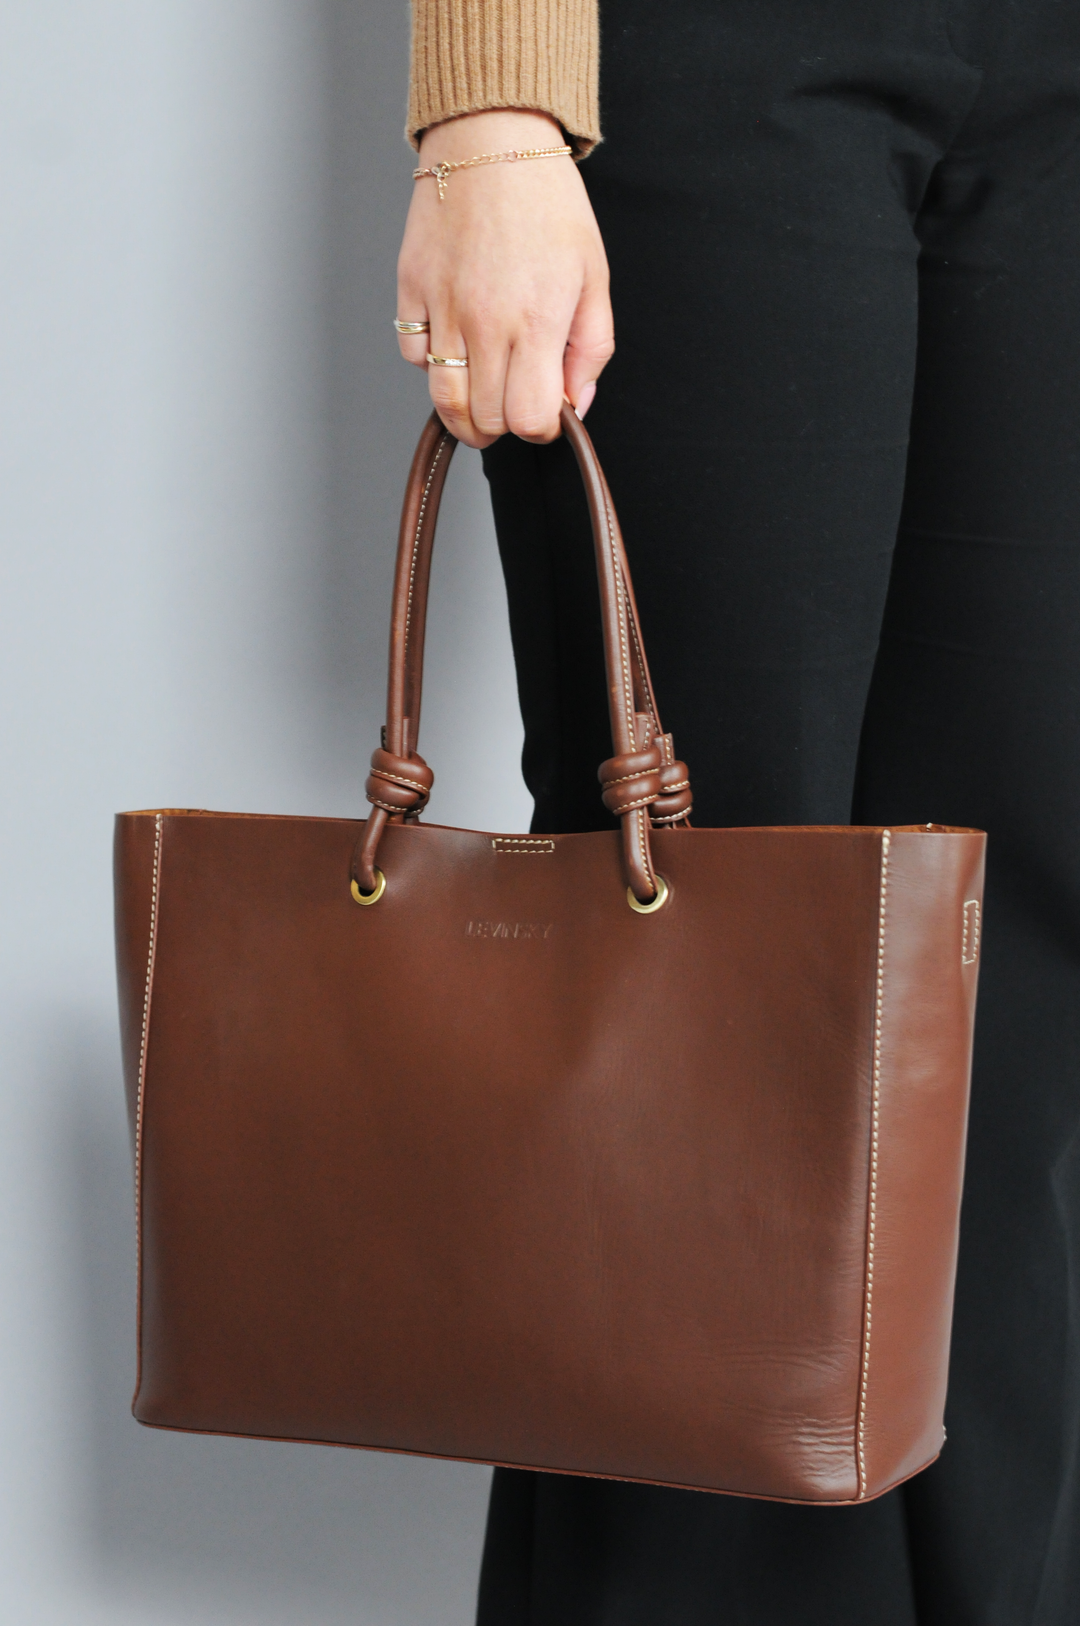 Tote Shopper 14838  - leather handbag Accesories - Brown